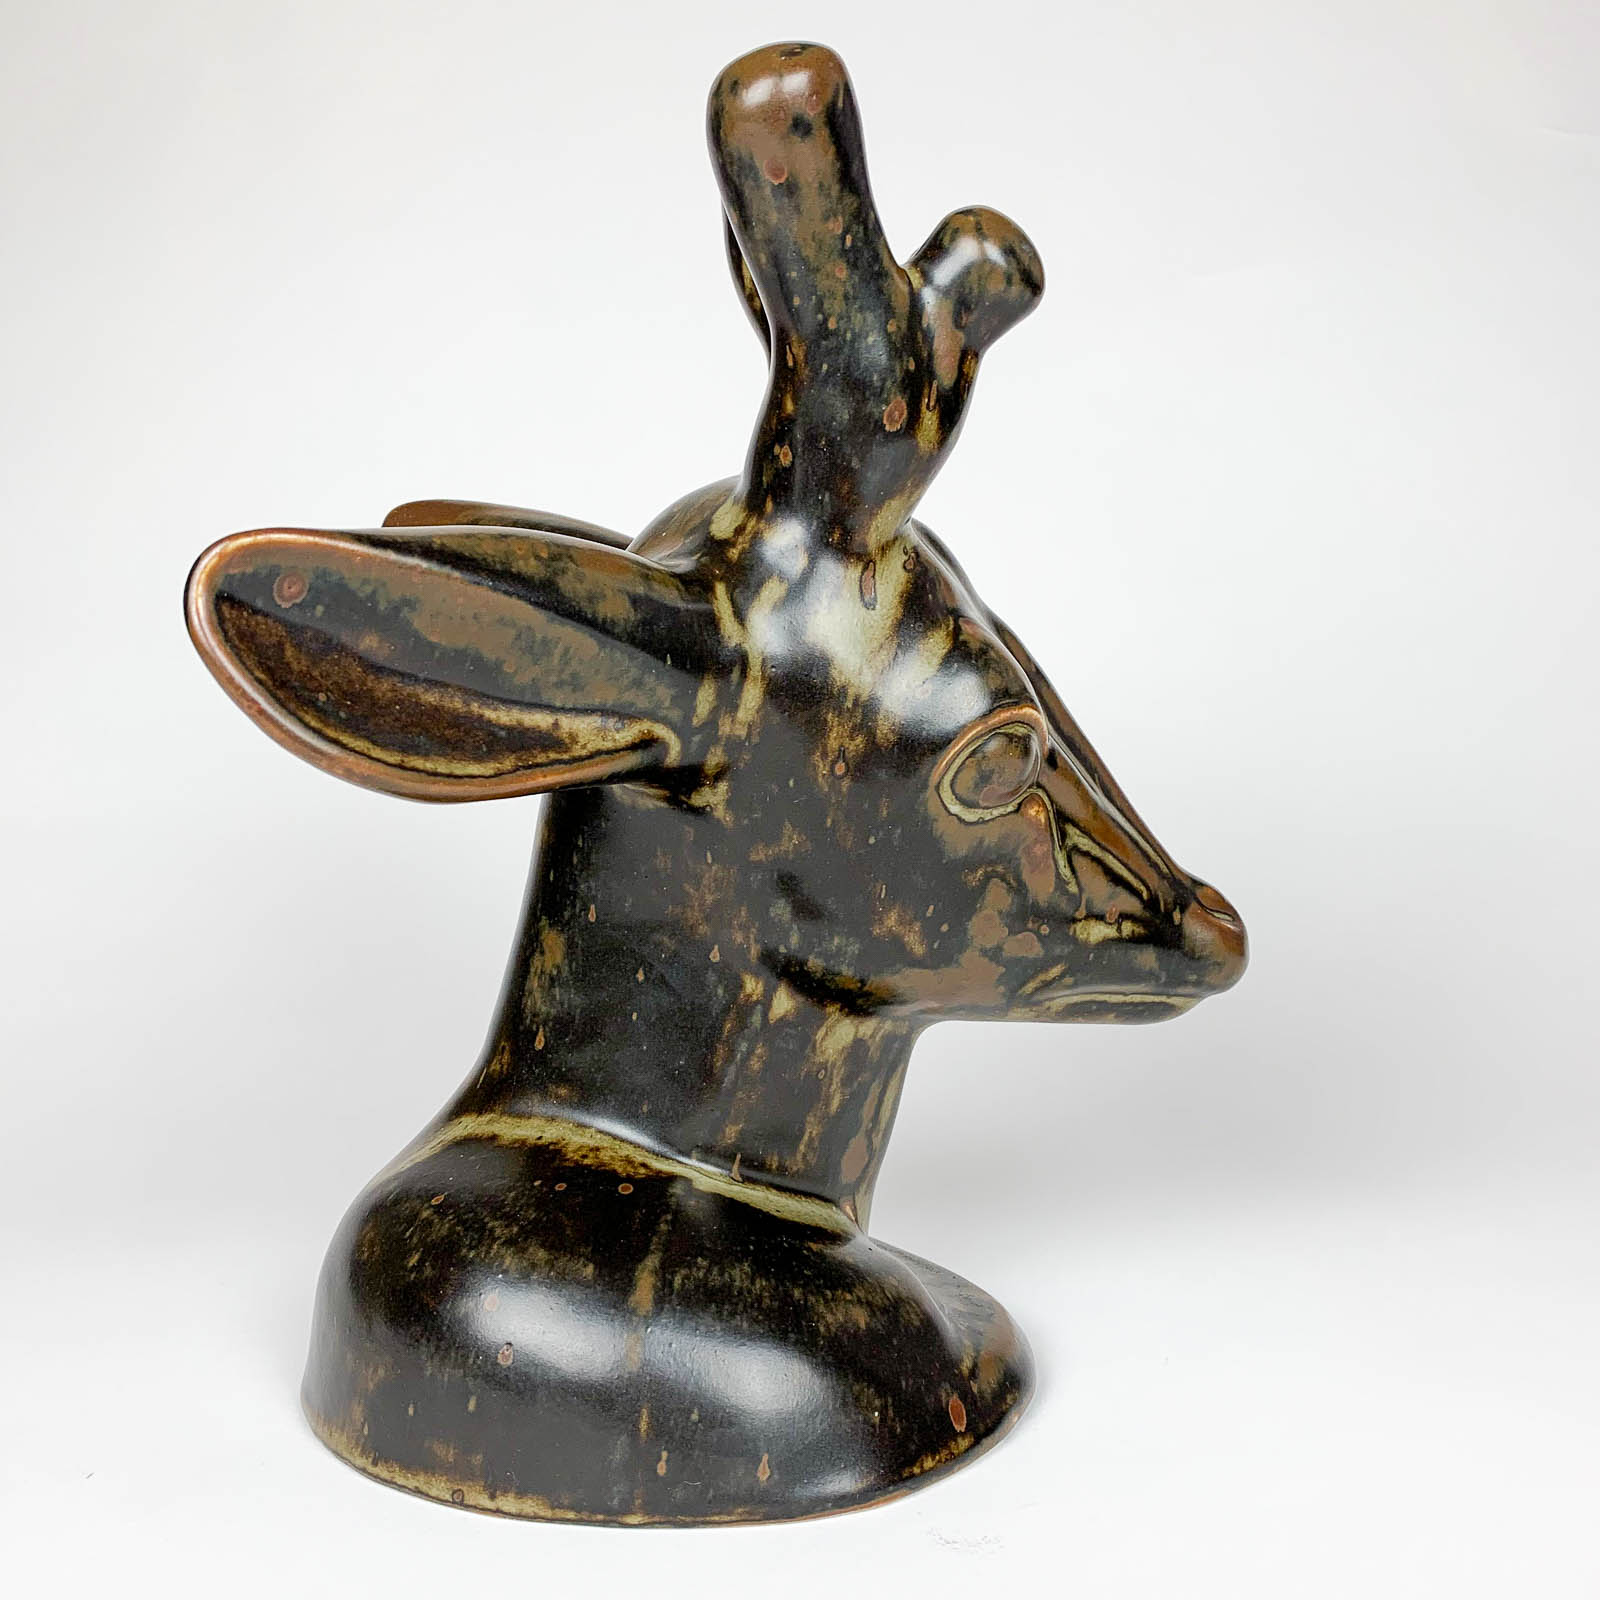 A stoneware Deerhead sculpture, model no: 20.803, sculpted by Axel Salto in 1946 and executed by Royal Copenhagen in 1950.